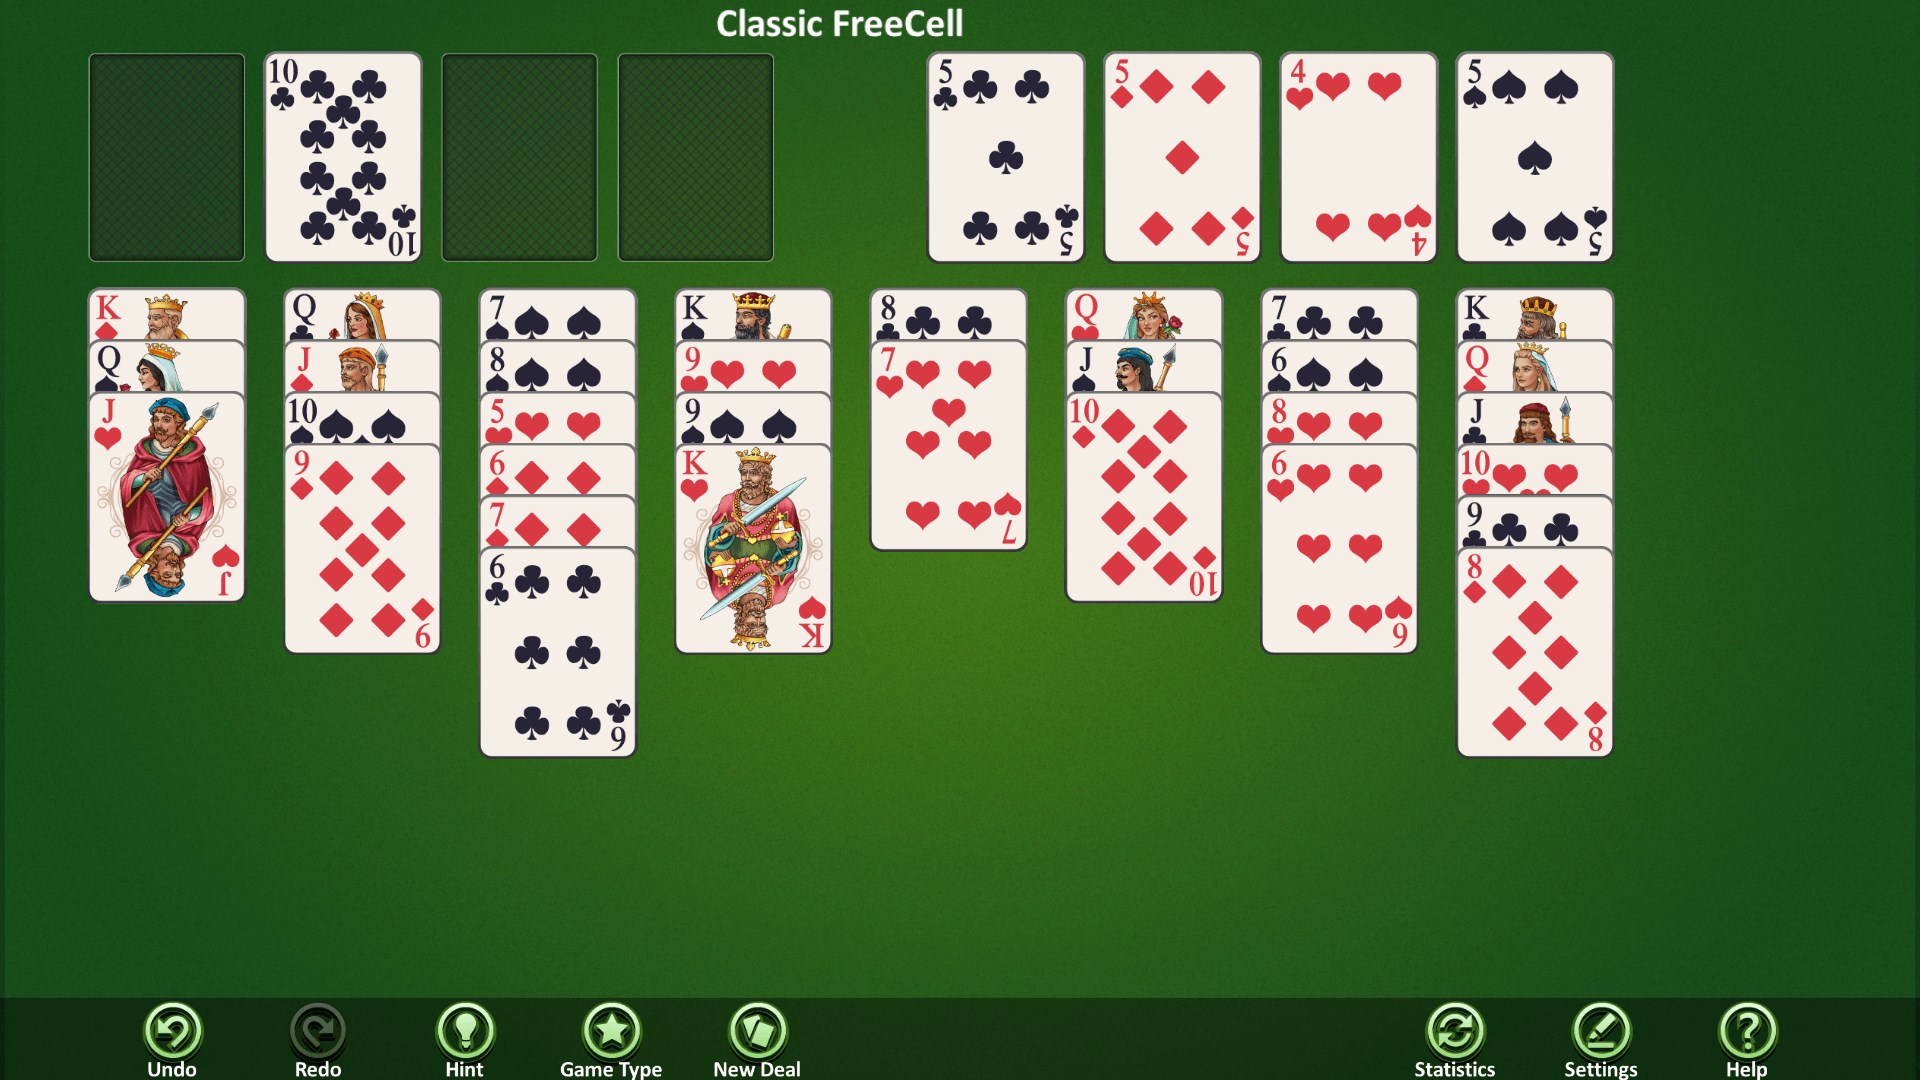 freecell for windows 10 free download